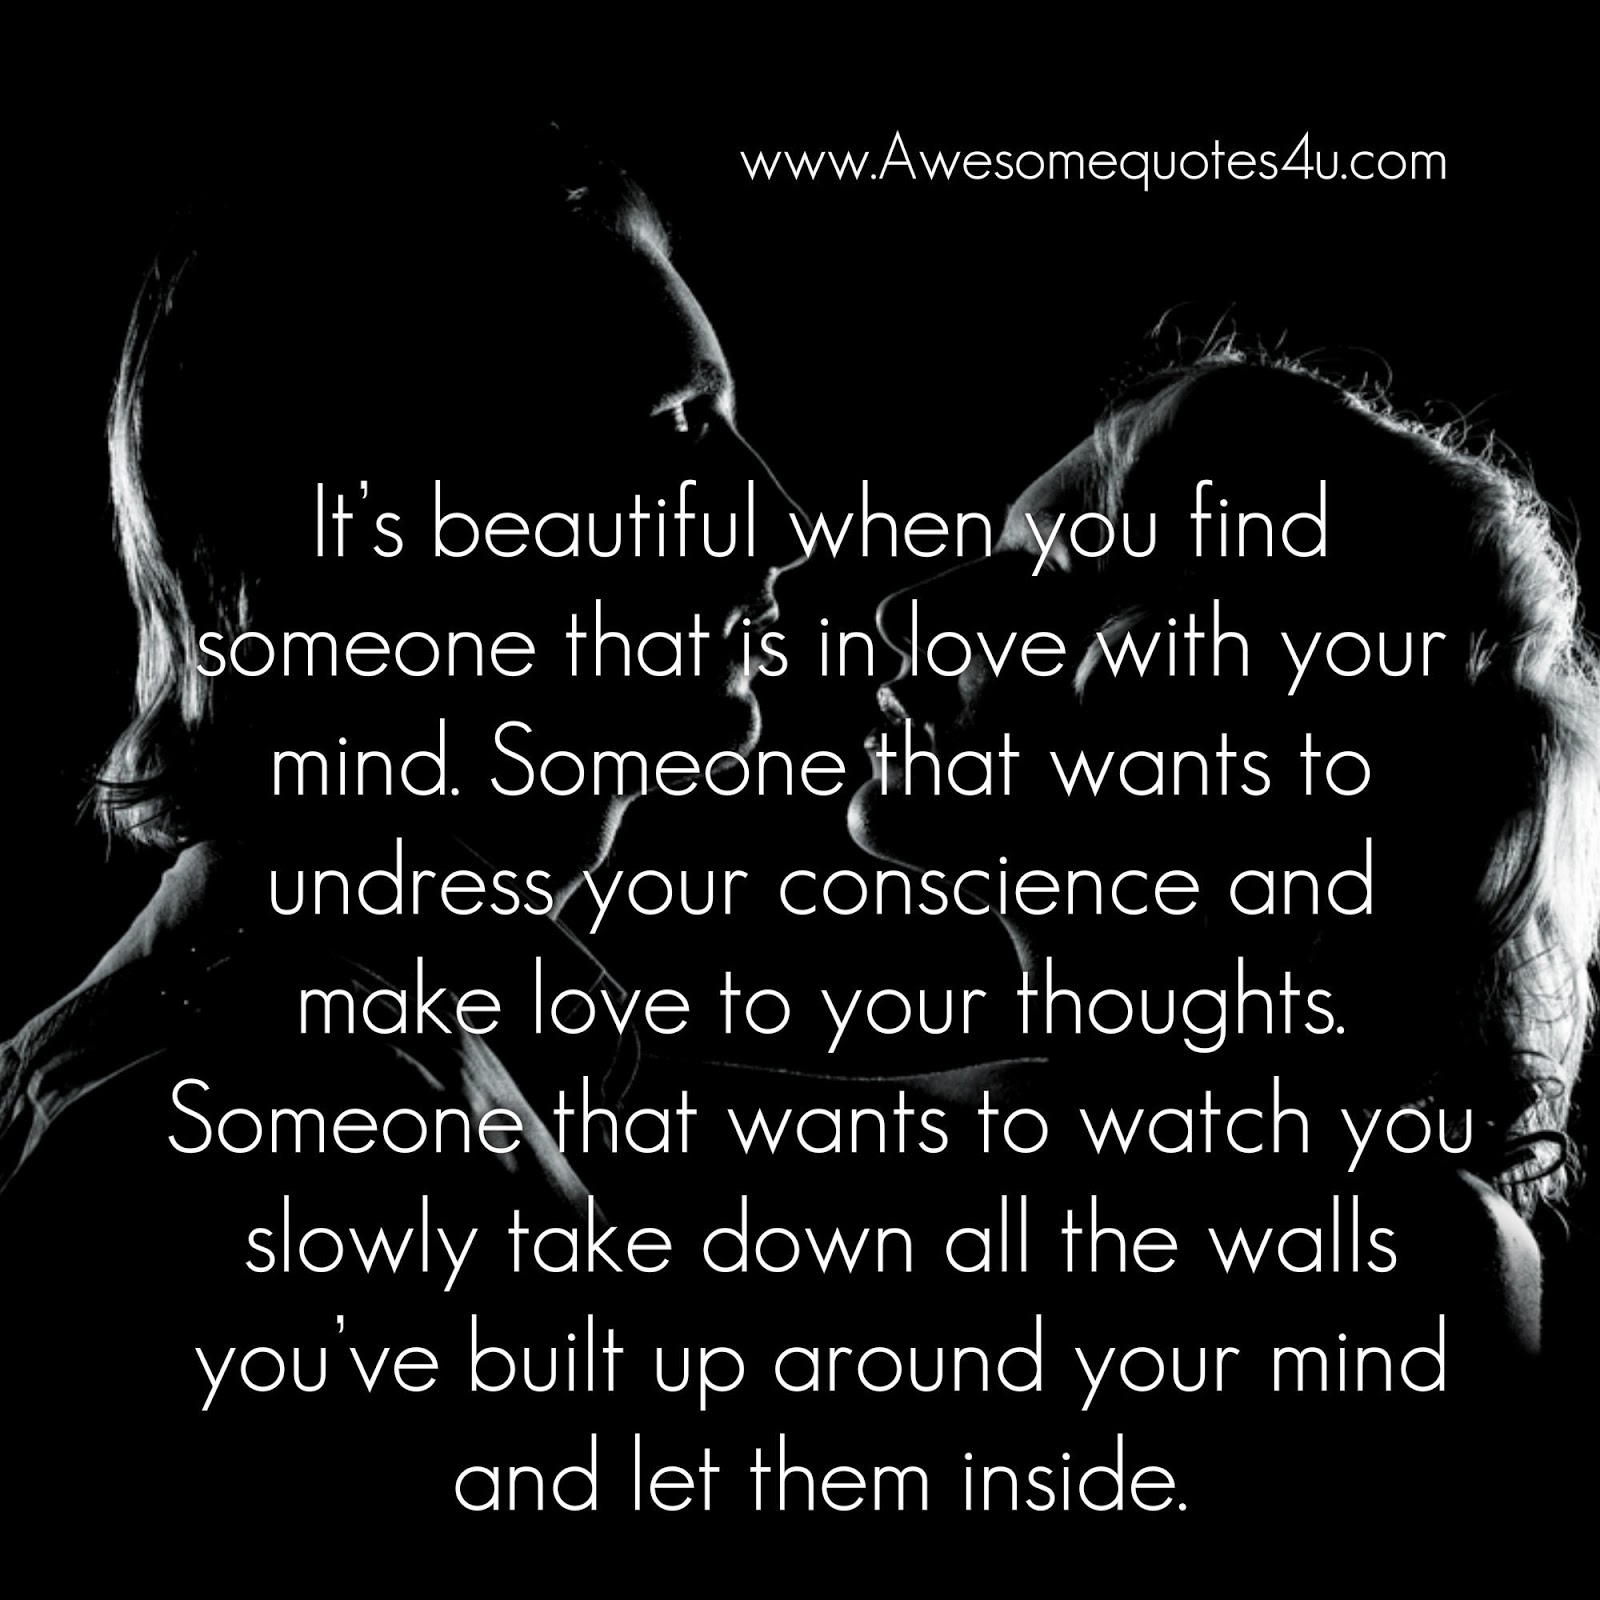 Awesome Quotes: When You Find Your Soulmate